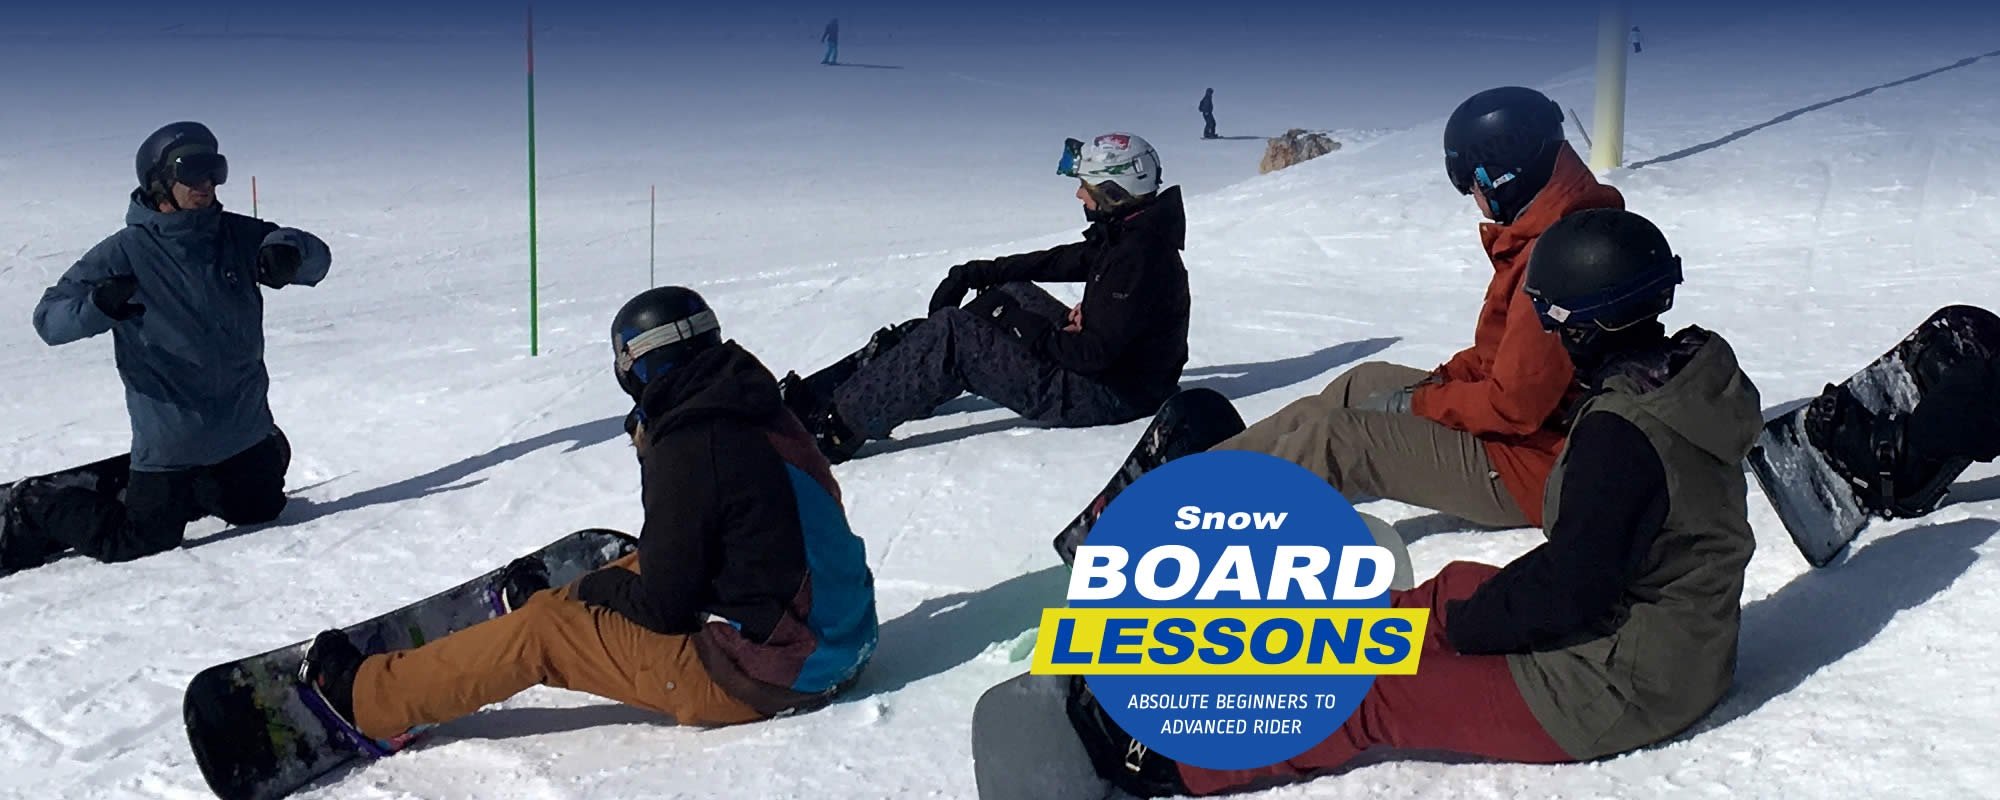 Snow Board Lessons at Val d'Isere in the French Alps